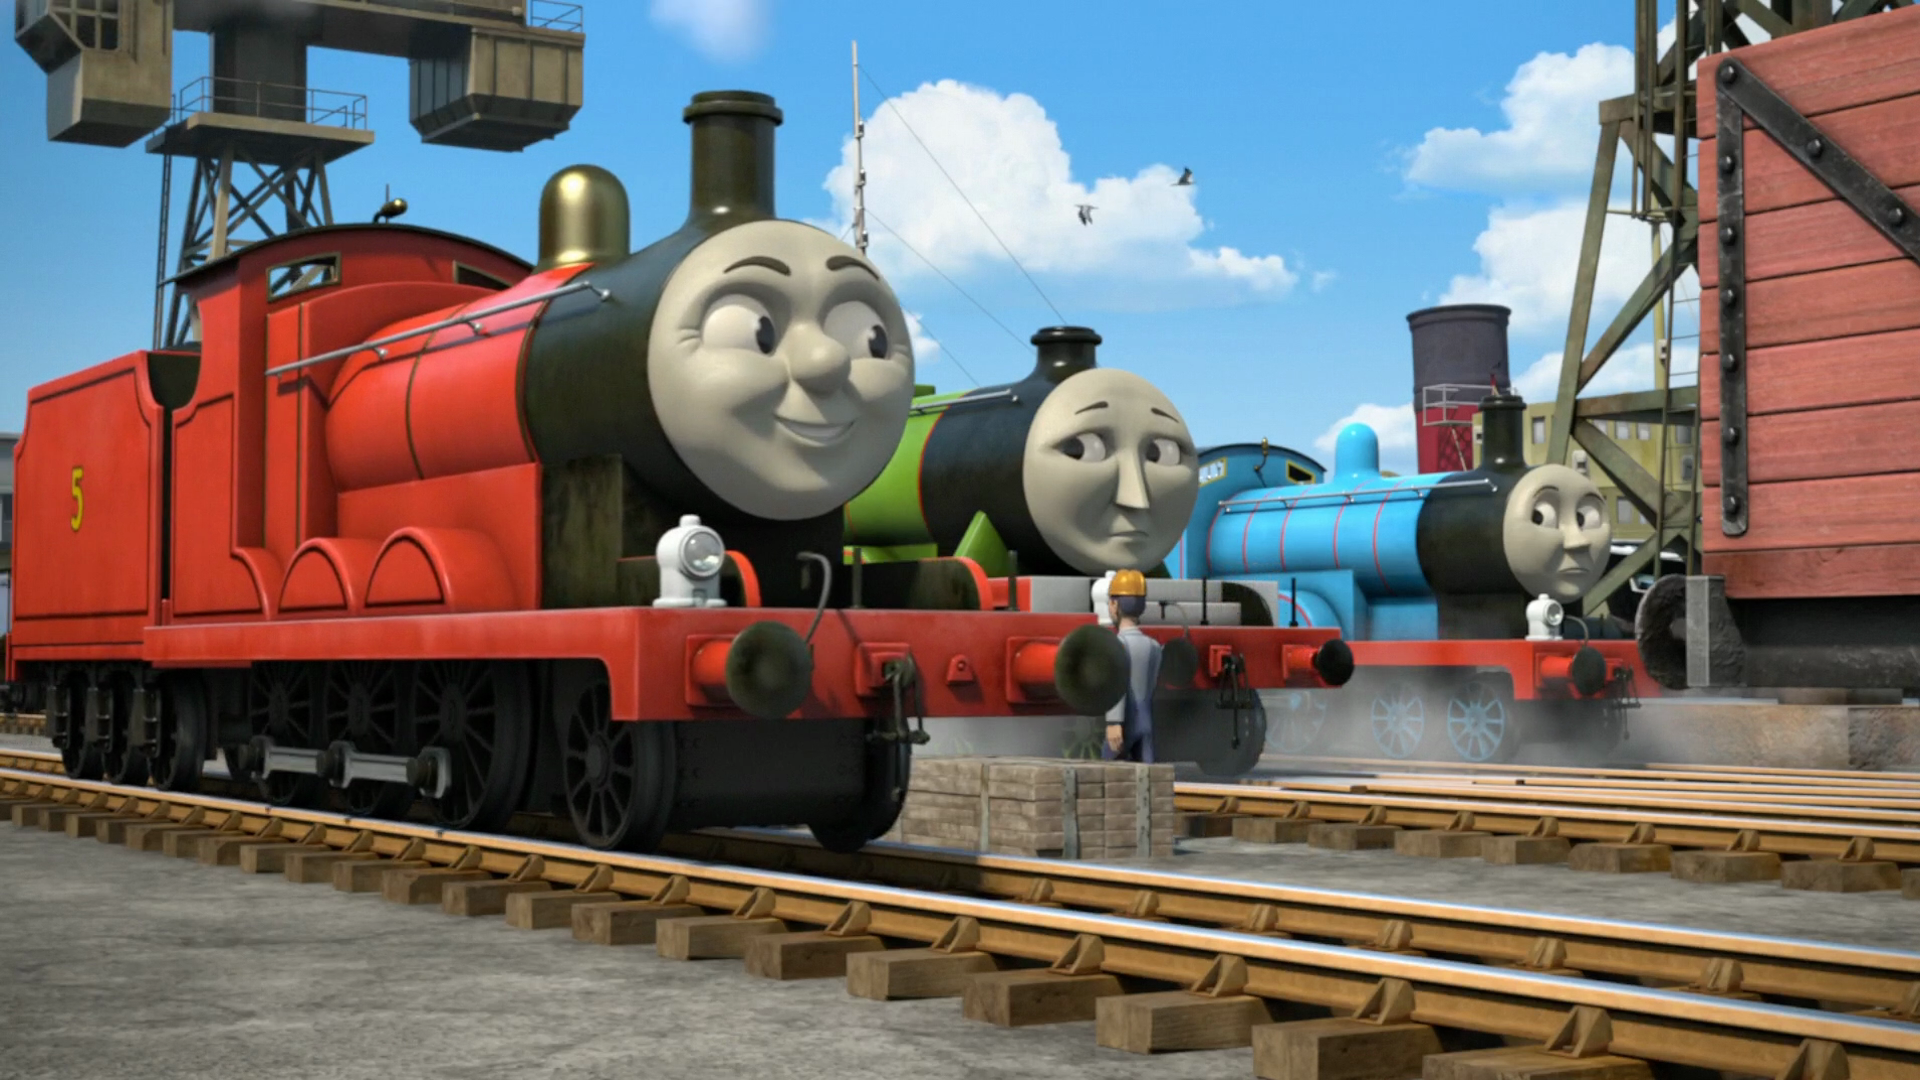 The Three Mix Traffic Engines, James, Henry and Edward. Thomas and friends, Thomas and his friends, Thomas the tank engine